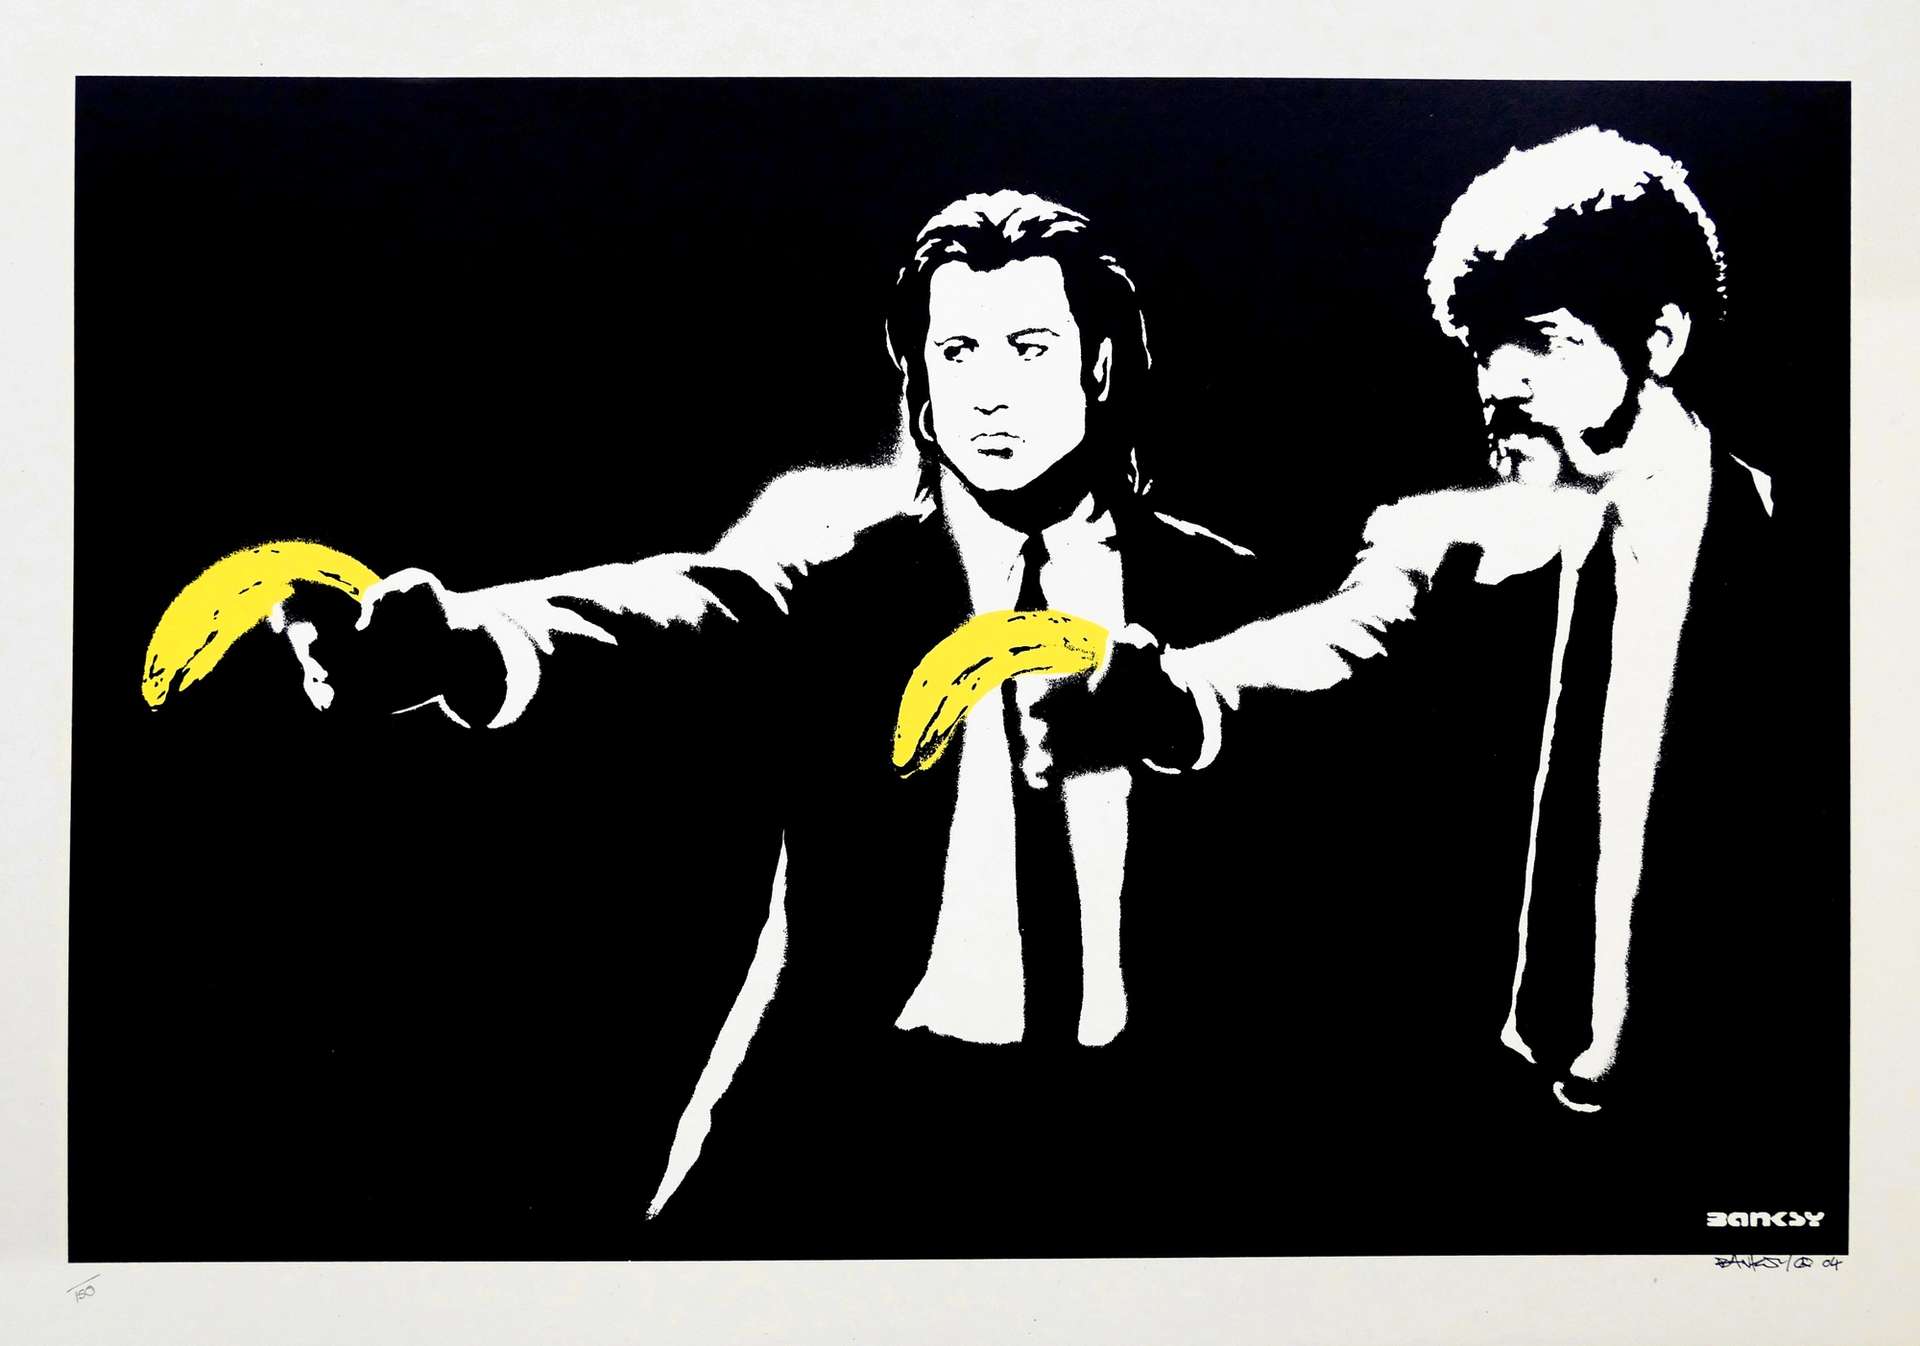 Pulp Fiction by Banksy